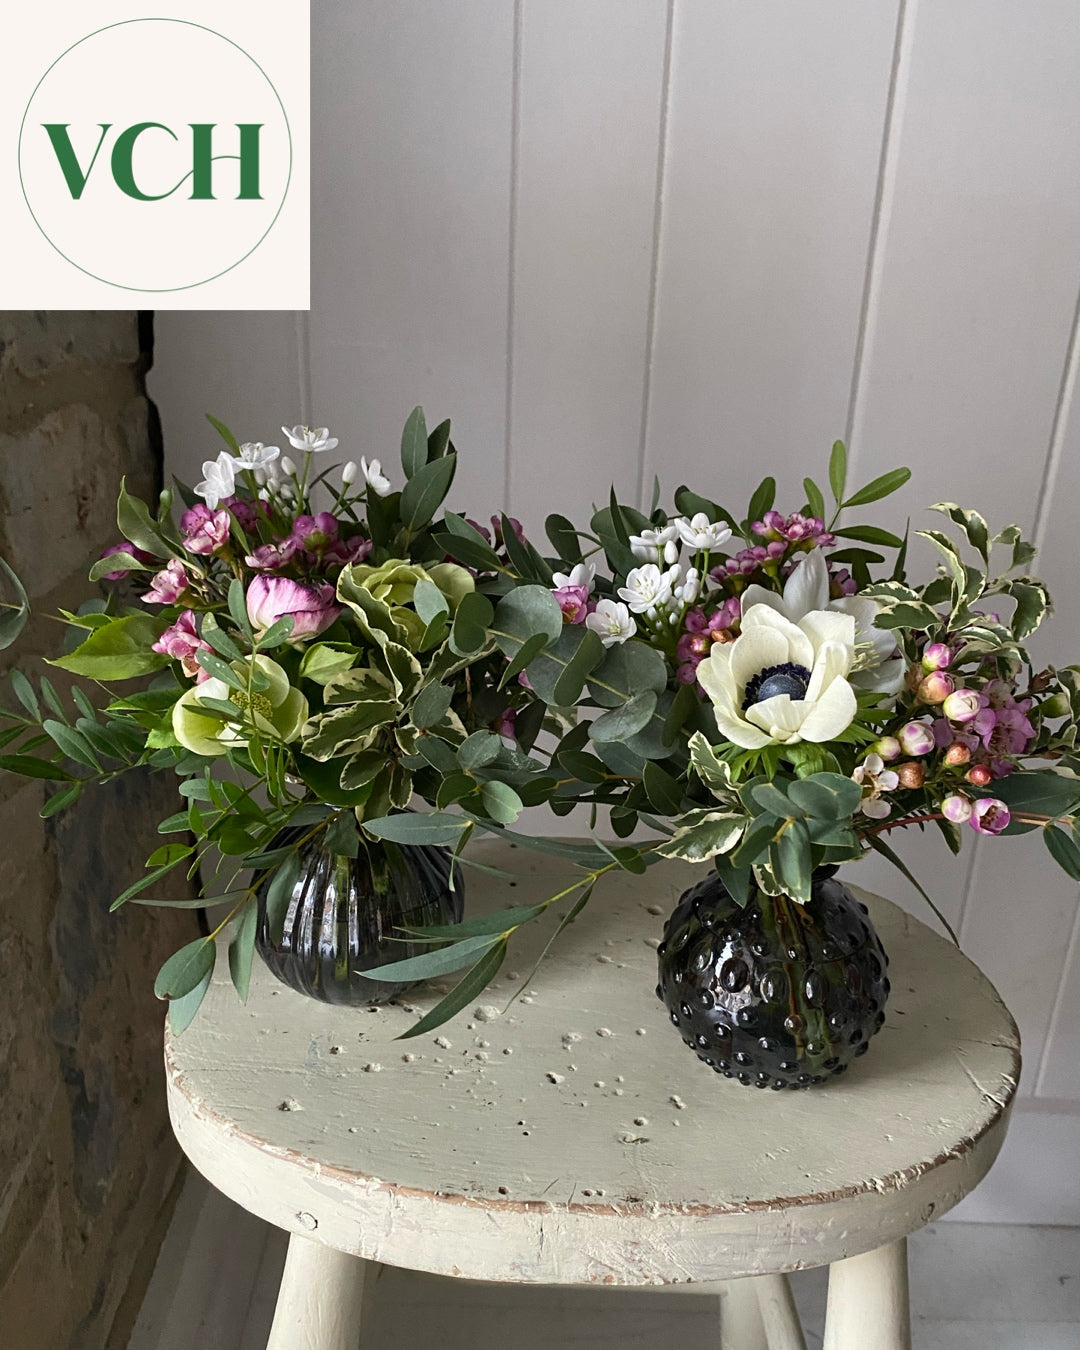 VCH STYLE - a pair of Lovely Ginnie Bud Vases - one delivered to you & one delivered to a friend - both including a posy of seasonal flowers